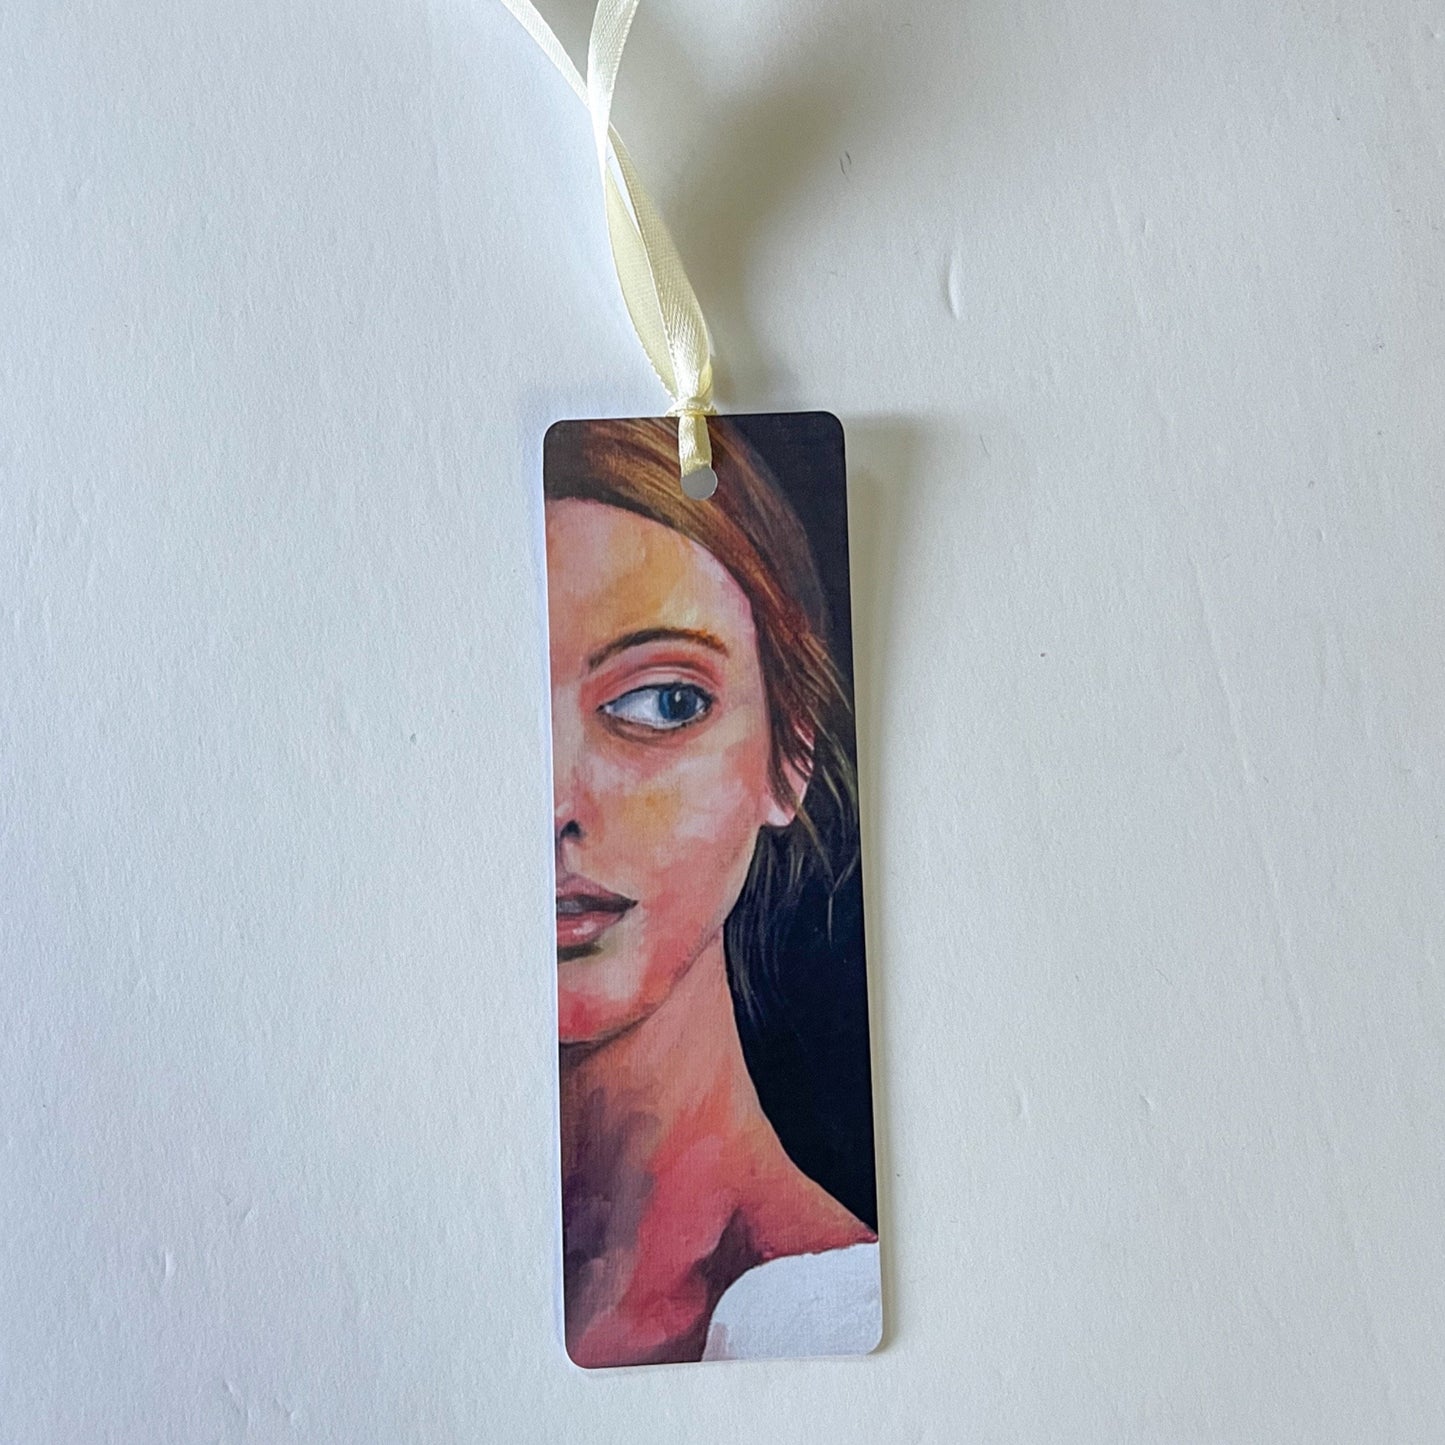 Art Bookmark "Lost in Thought" - 2x6 inches High Glossy Finish